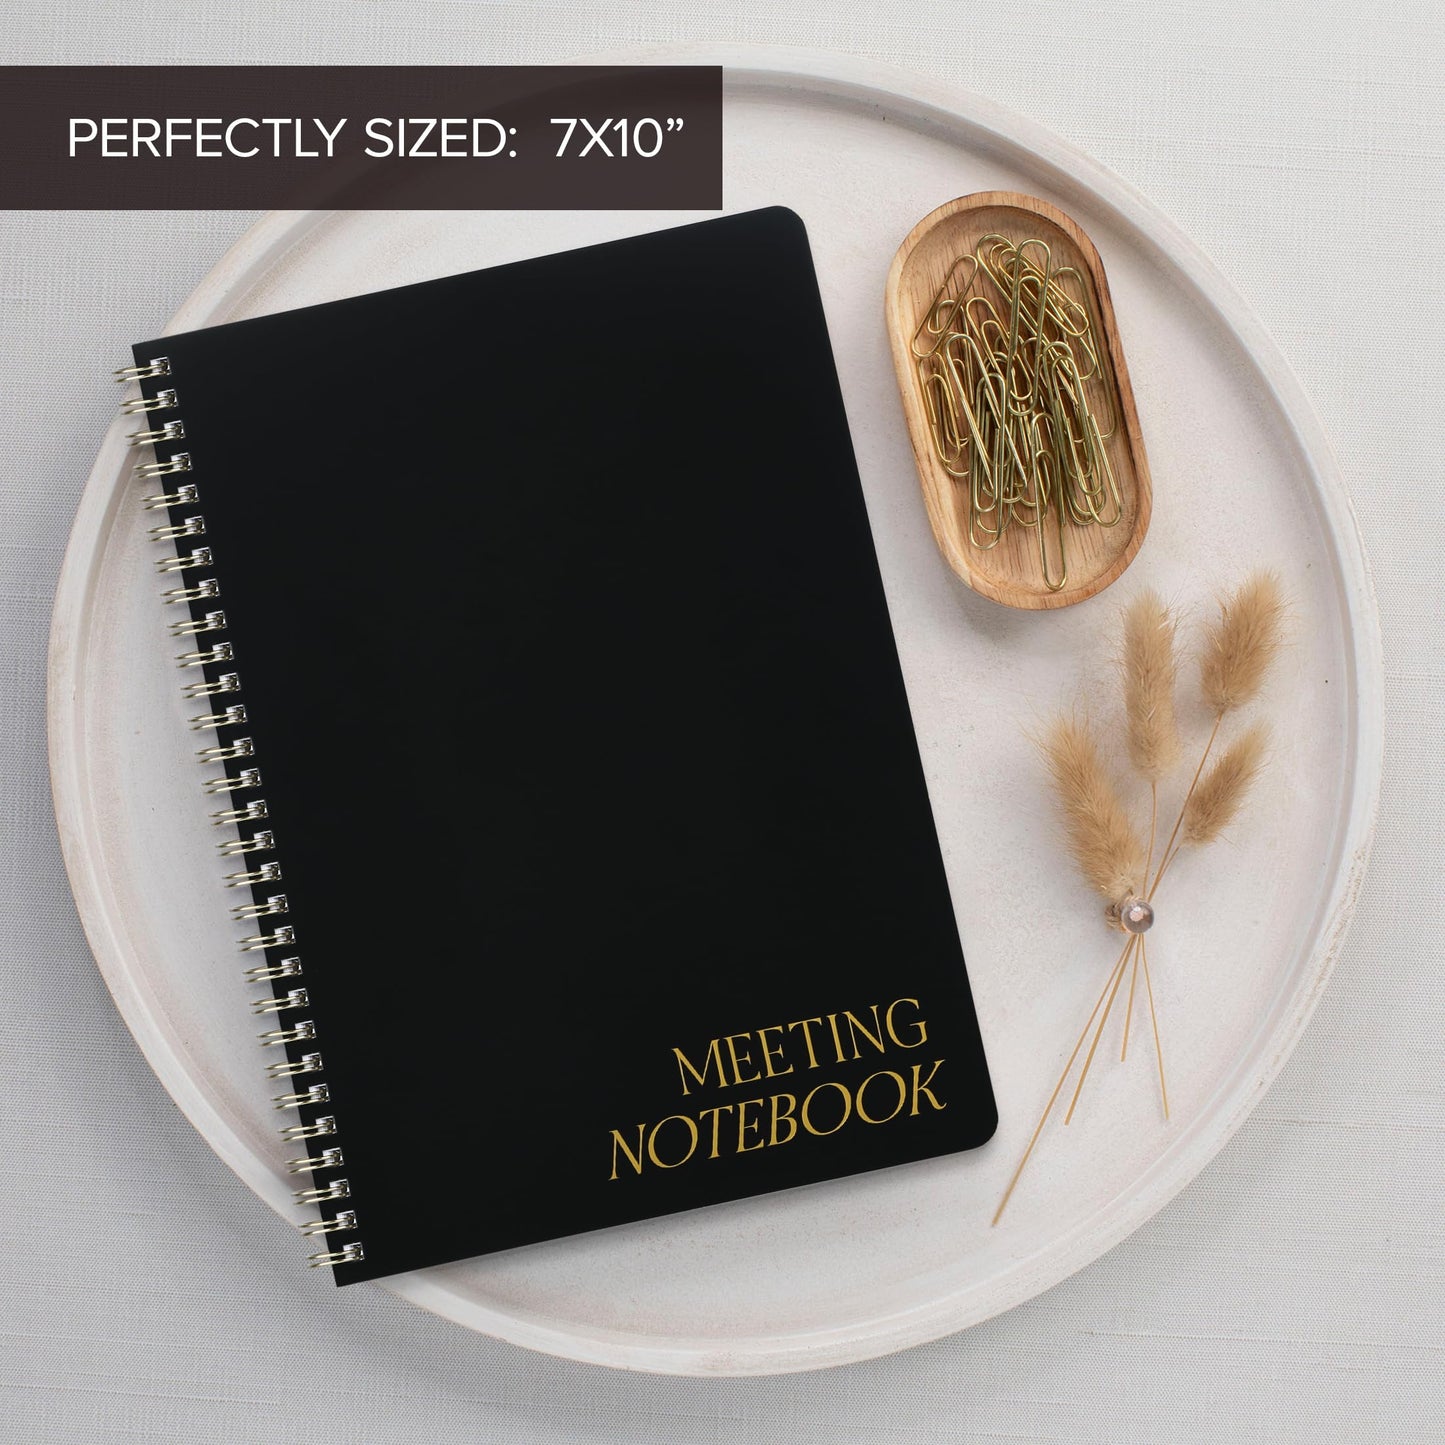 ZICOTO Simplified Meeting Notebook For Work Organization - Easily Take Notes And Keep Agendas on Track - The Perfect Office Planner Supplies for Women & Men to Professionally Manage Business Projects